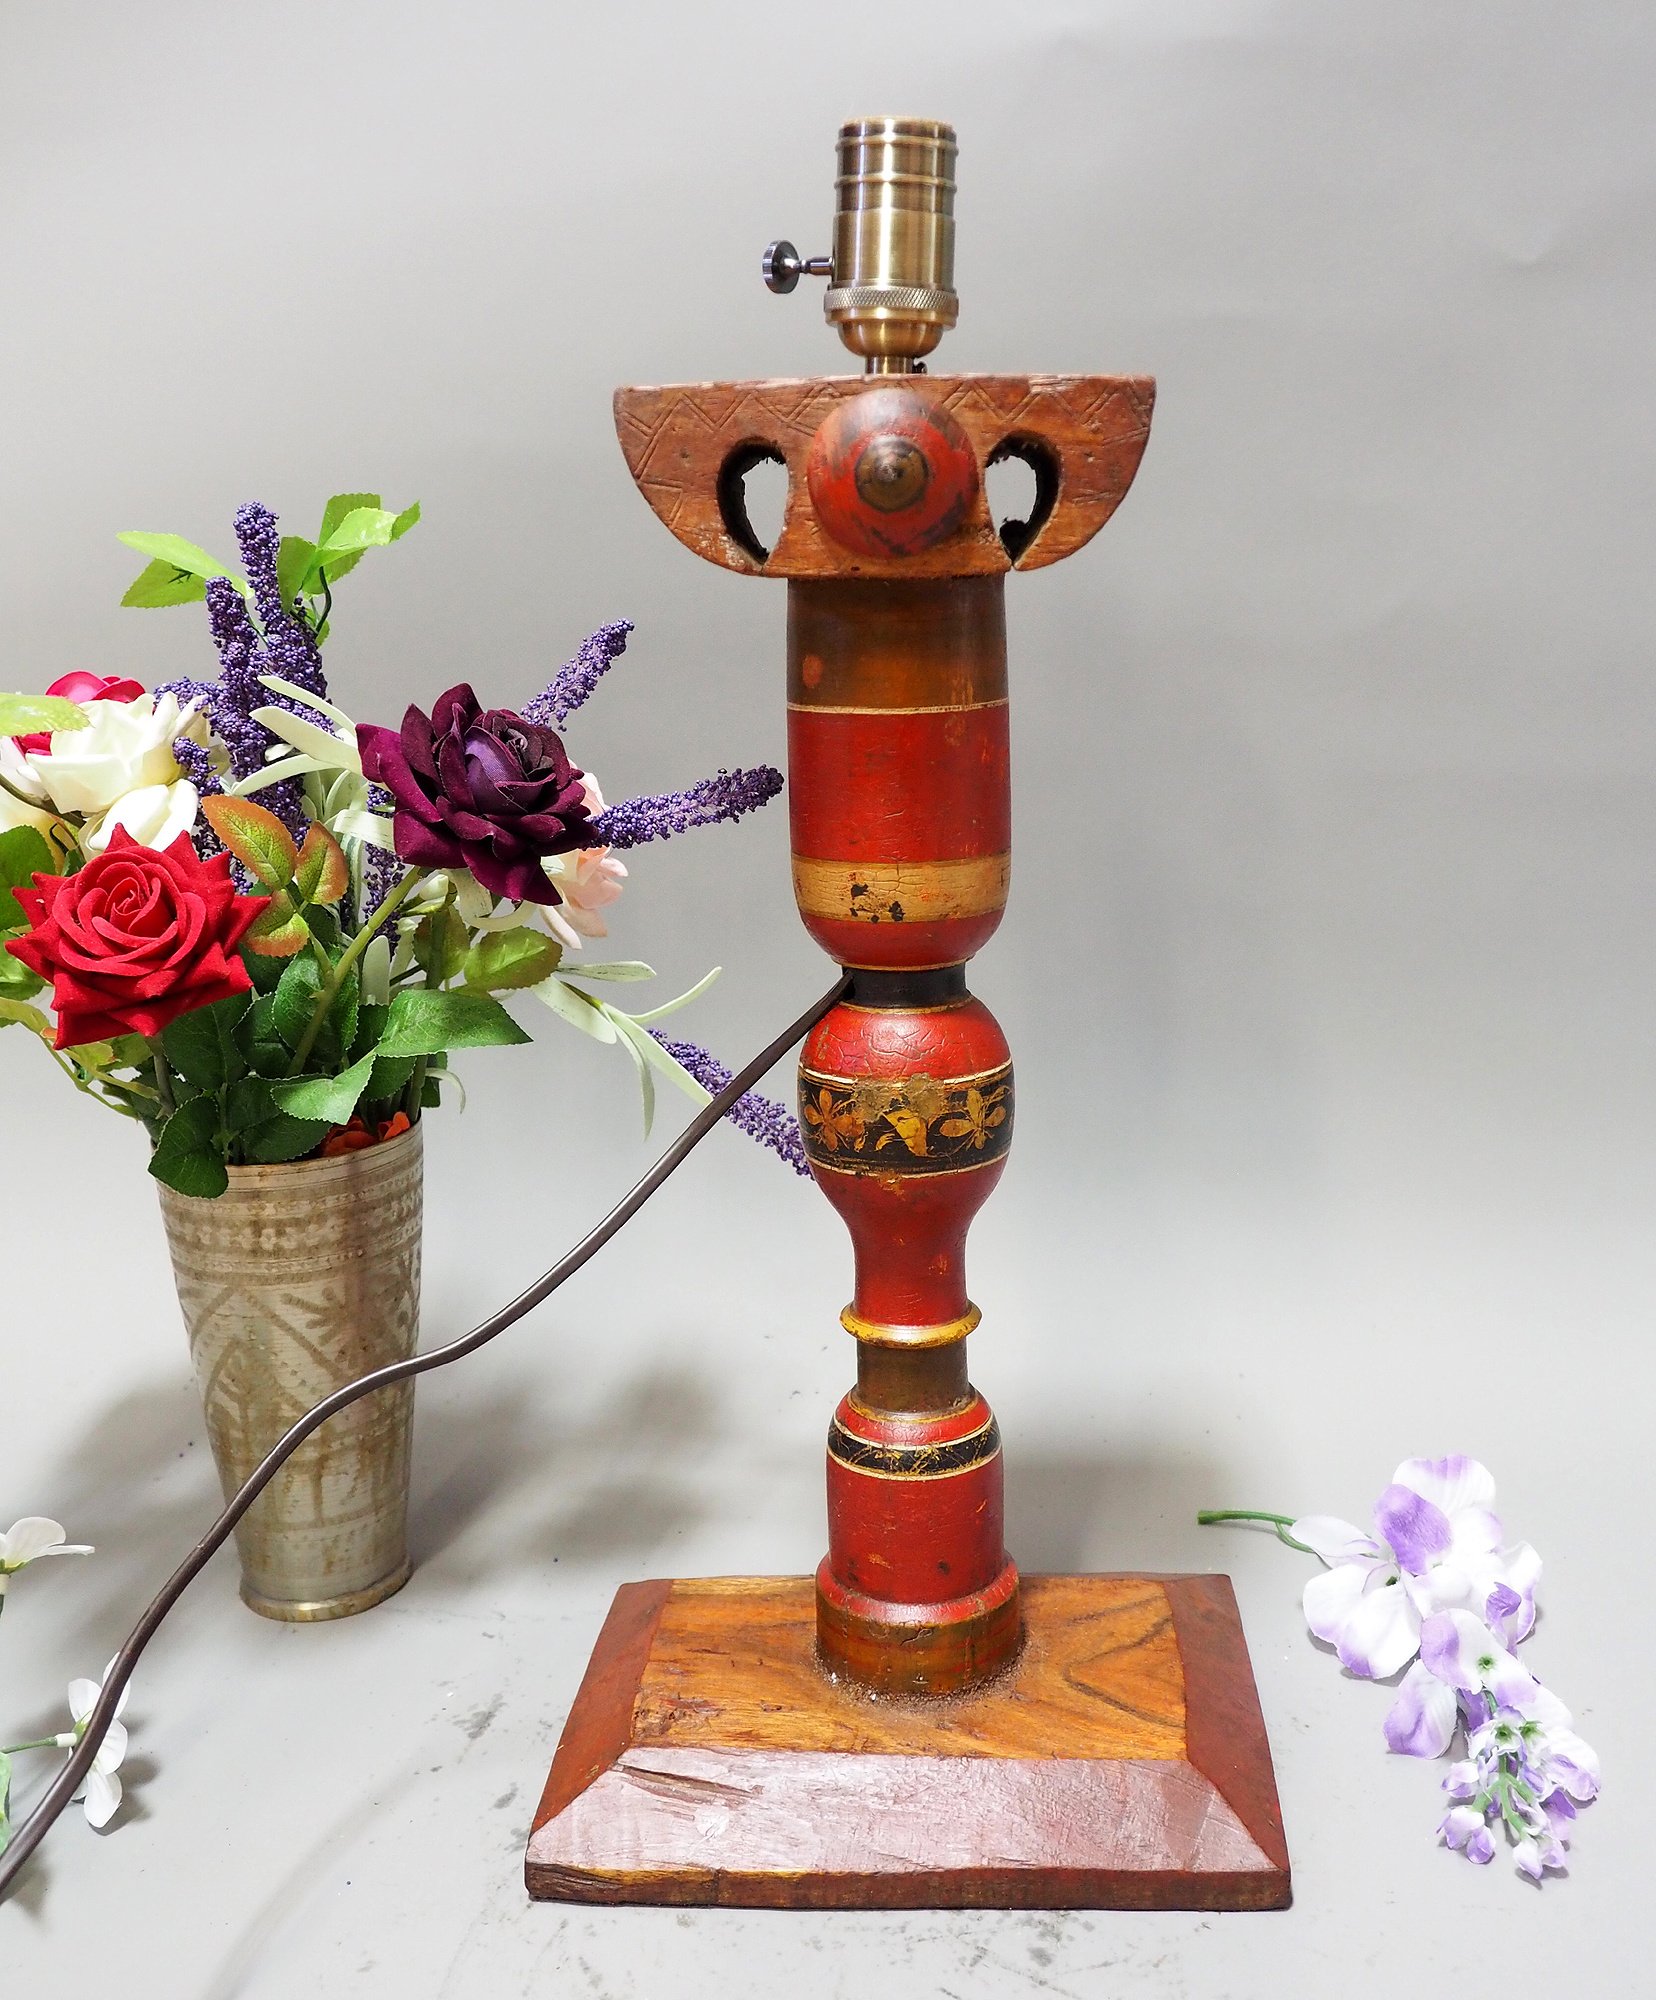 Antique handpainted stunning Vintage Lacquerware wooden Table Lamp with Vintage light fitting from Afghanistan / Pakistan No:21/4